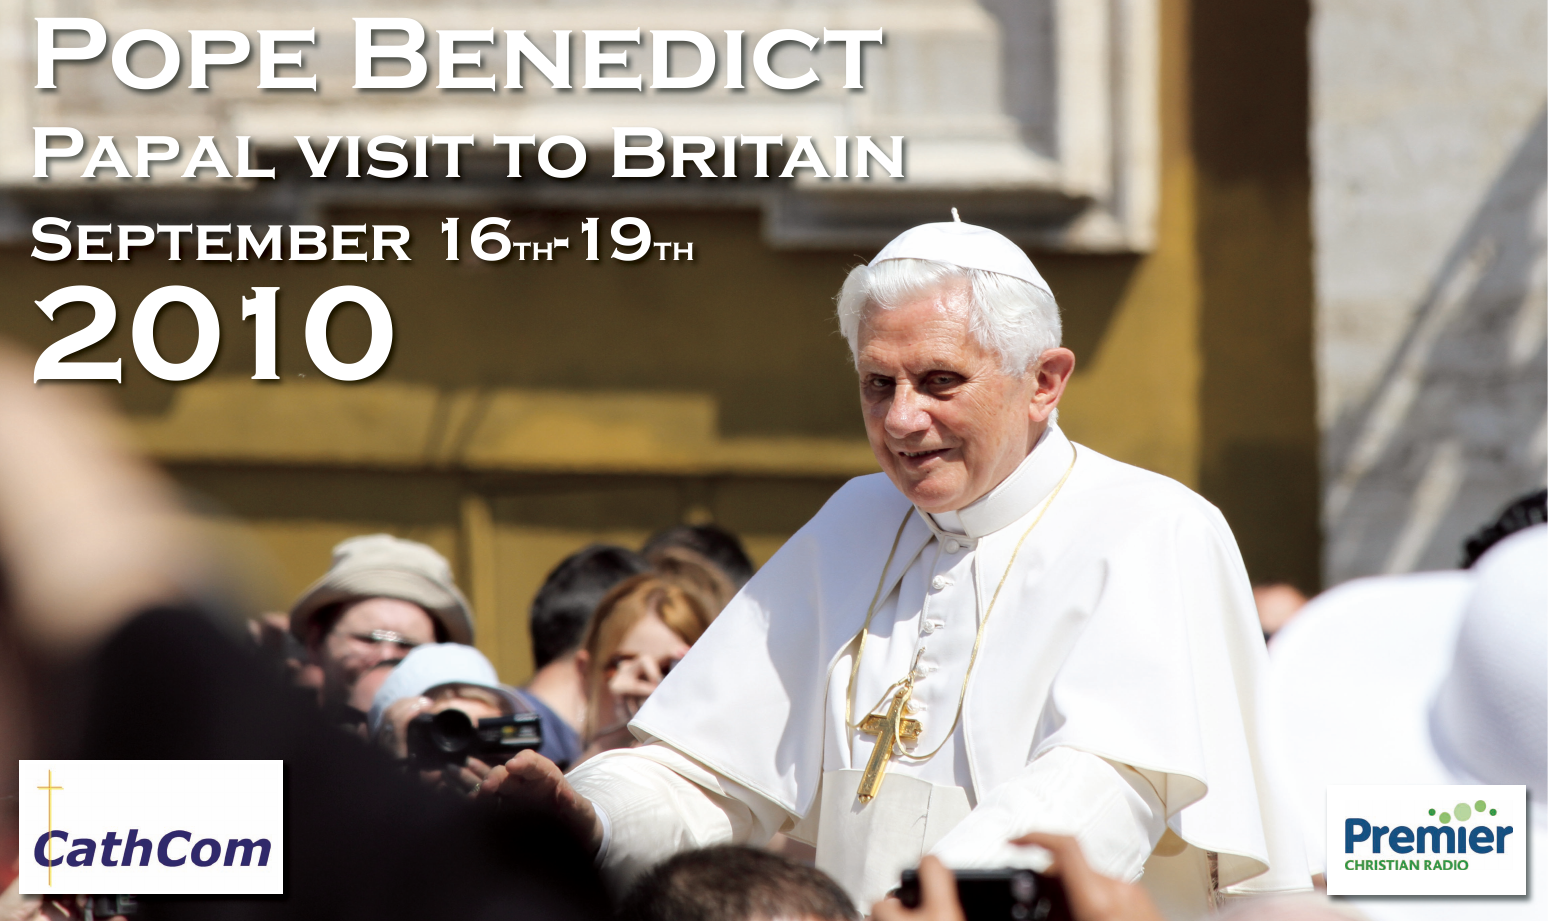 16 Sept 2010 edition of the Papal Visit - London